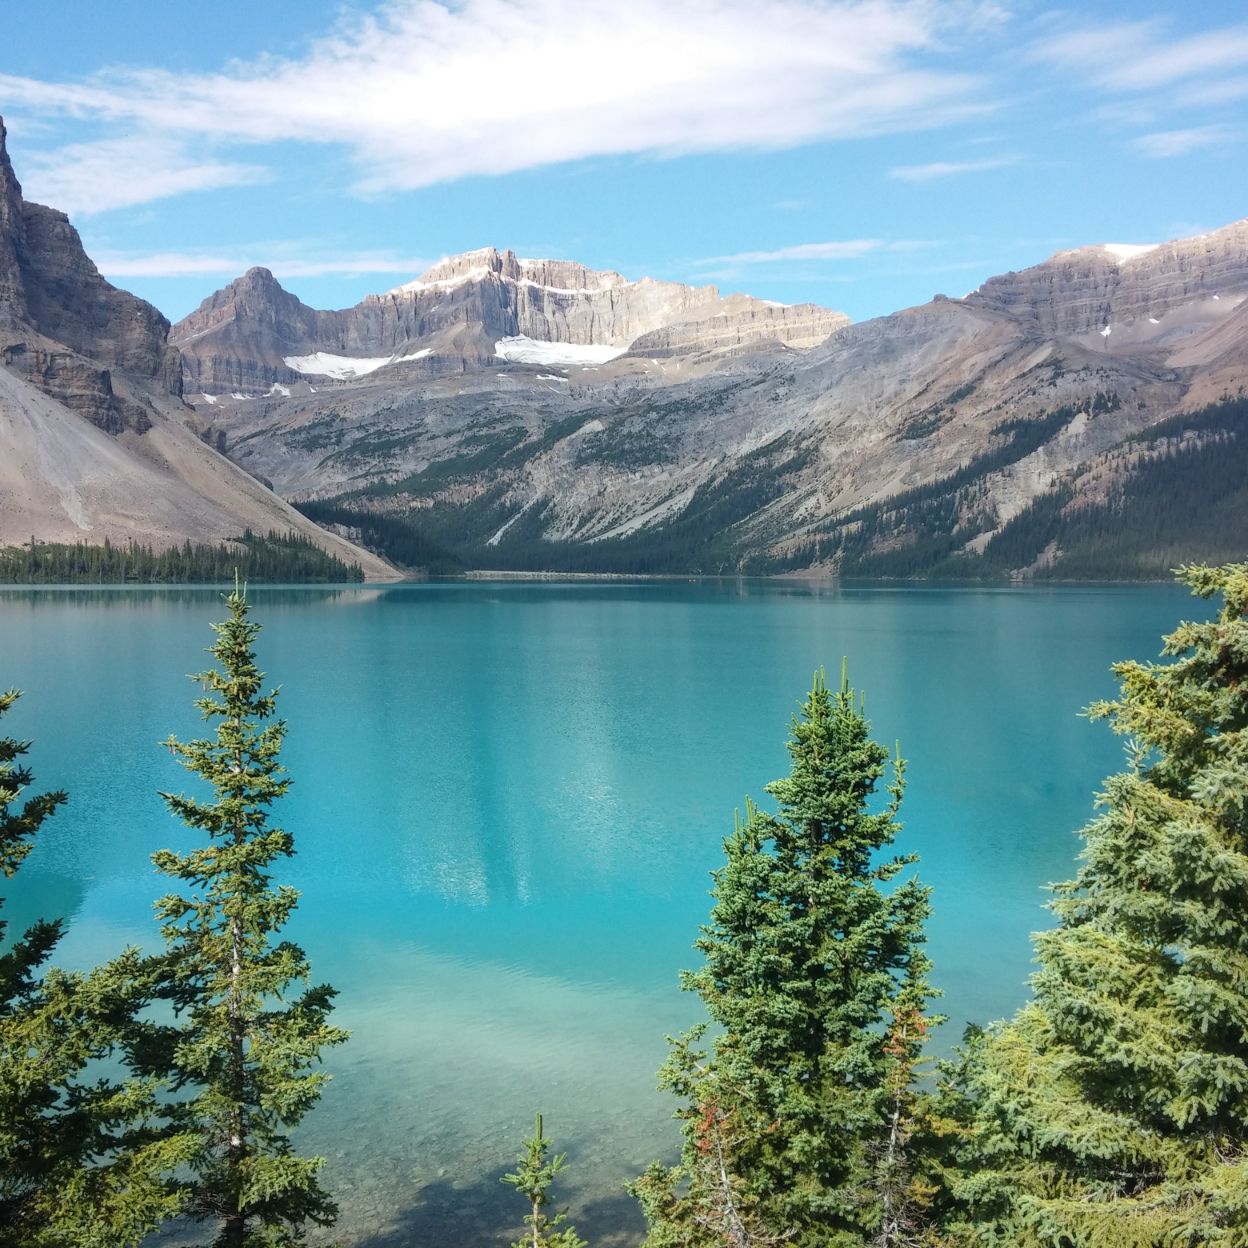 Banff-things-to-go-best-restaurants-Banff-adventure-banff-best-restaurants-downtown-banff-adventure-biking-adventure-group-travel-banff-places-to-eat-banff-glamping-bow-river